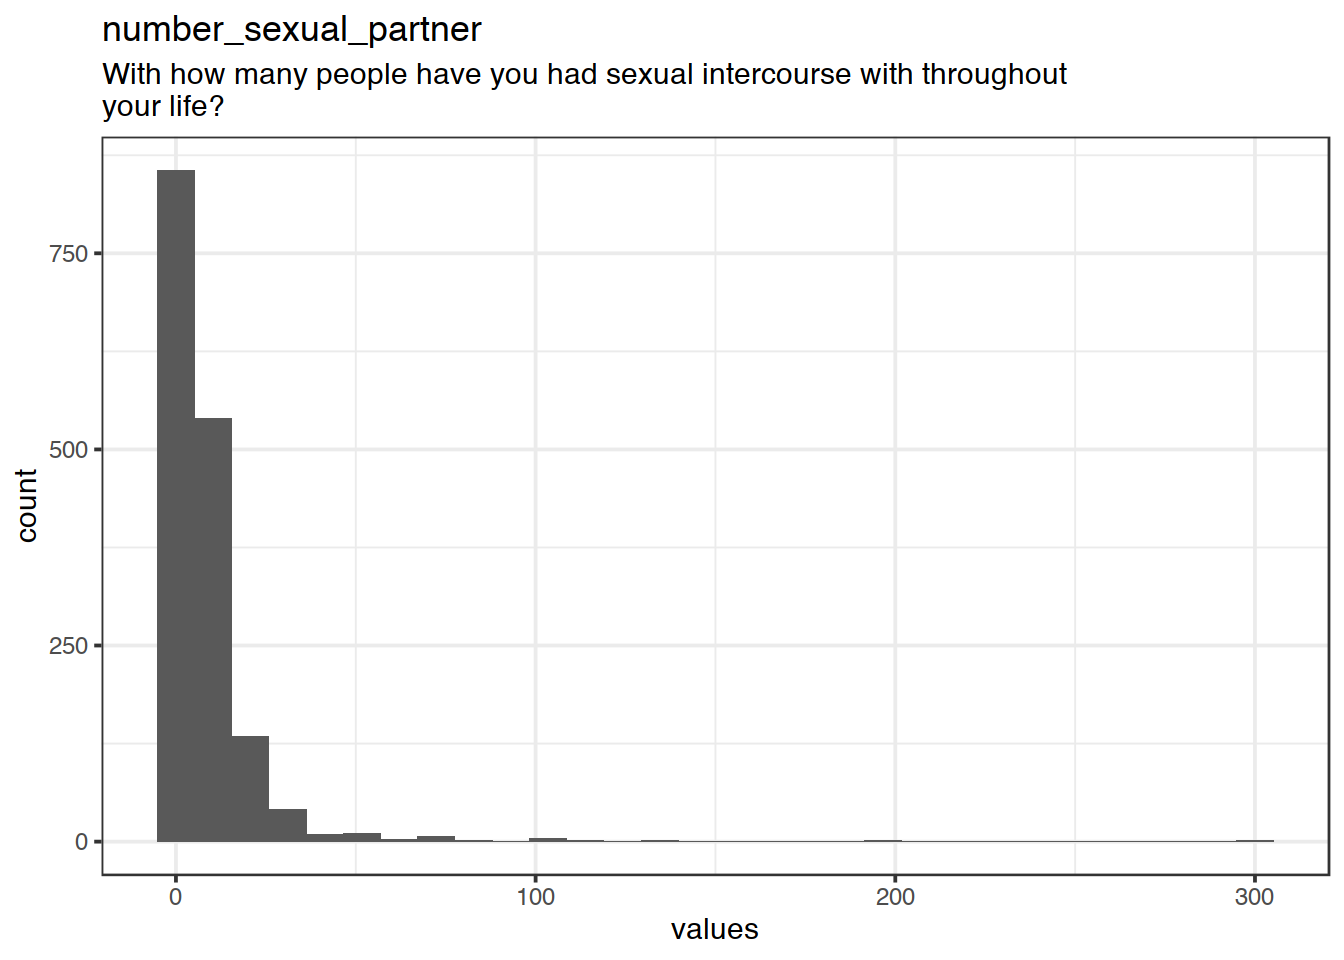 Distribution of values for number_sexual_partner